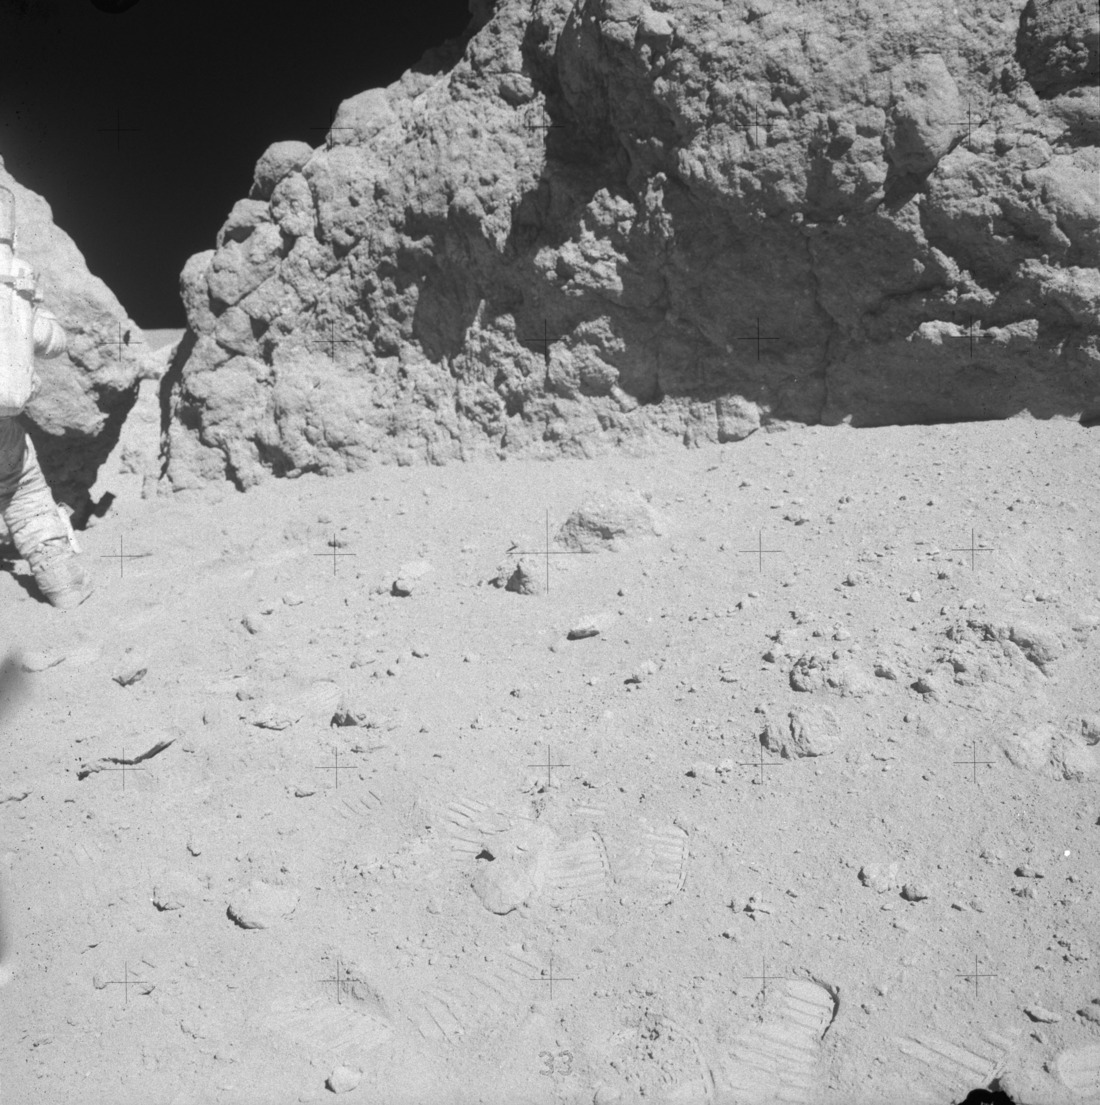 Handheld image taken by Duke showing Young near the smaller attached boulder "outhouse" rock and "House" rock on the right. Apollo image AS16-106-17354 [NASA]